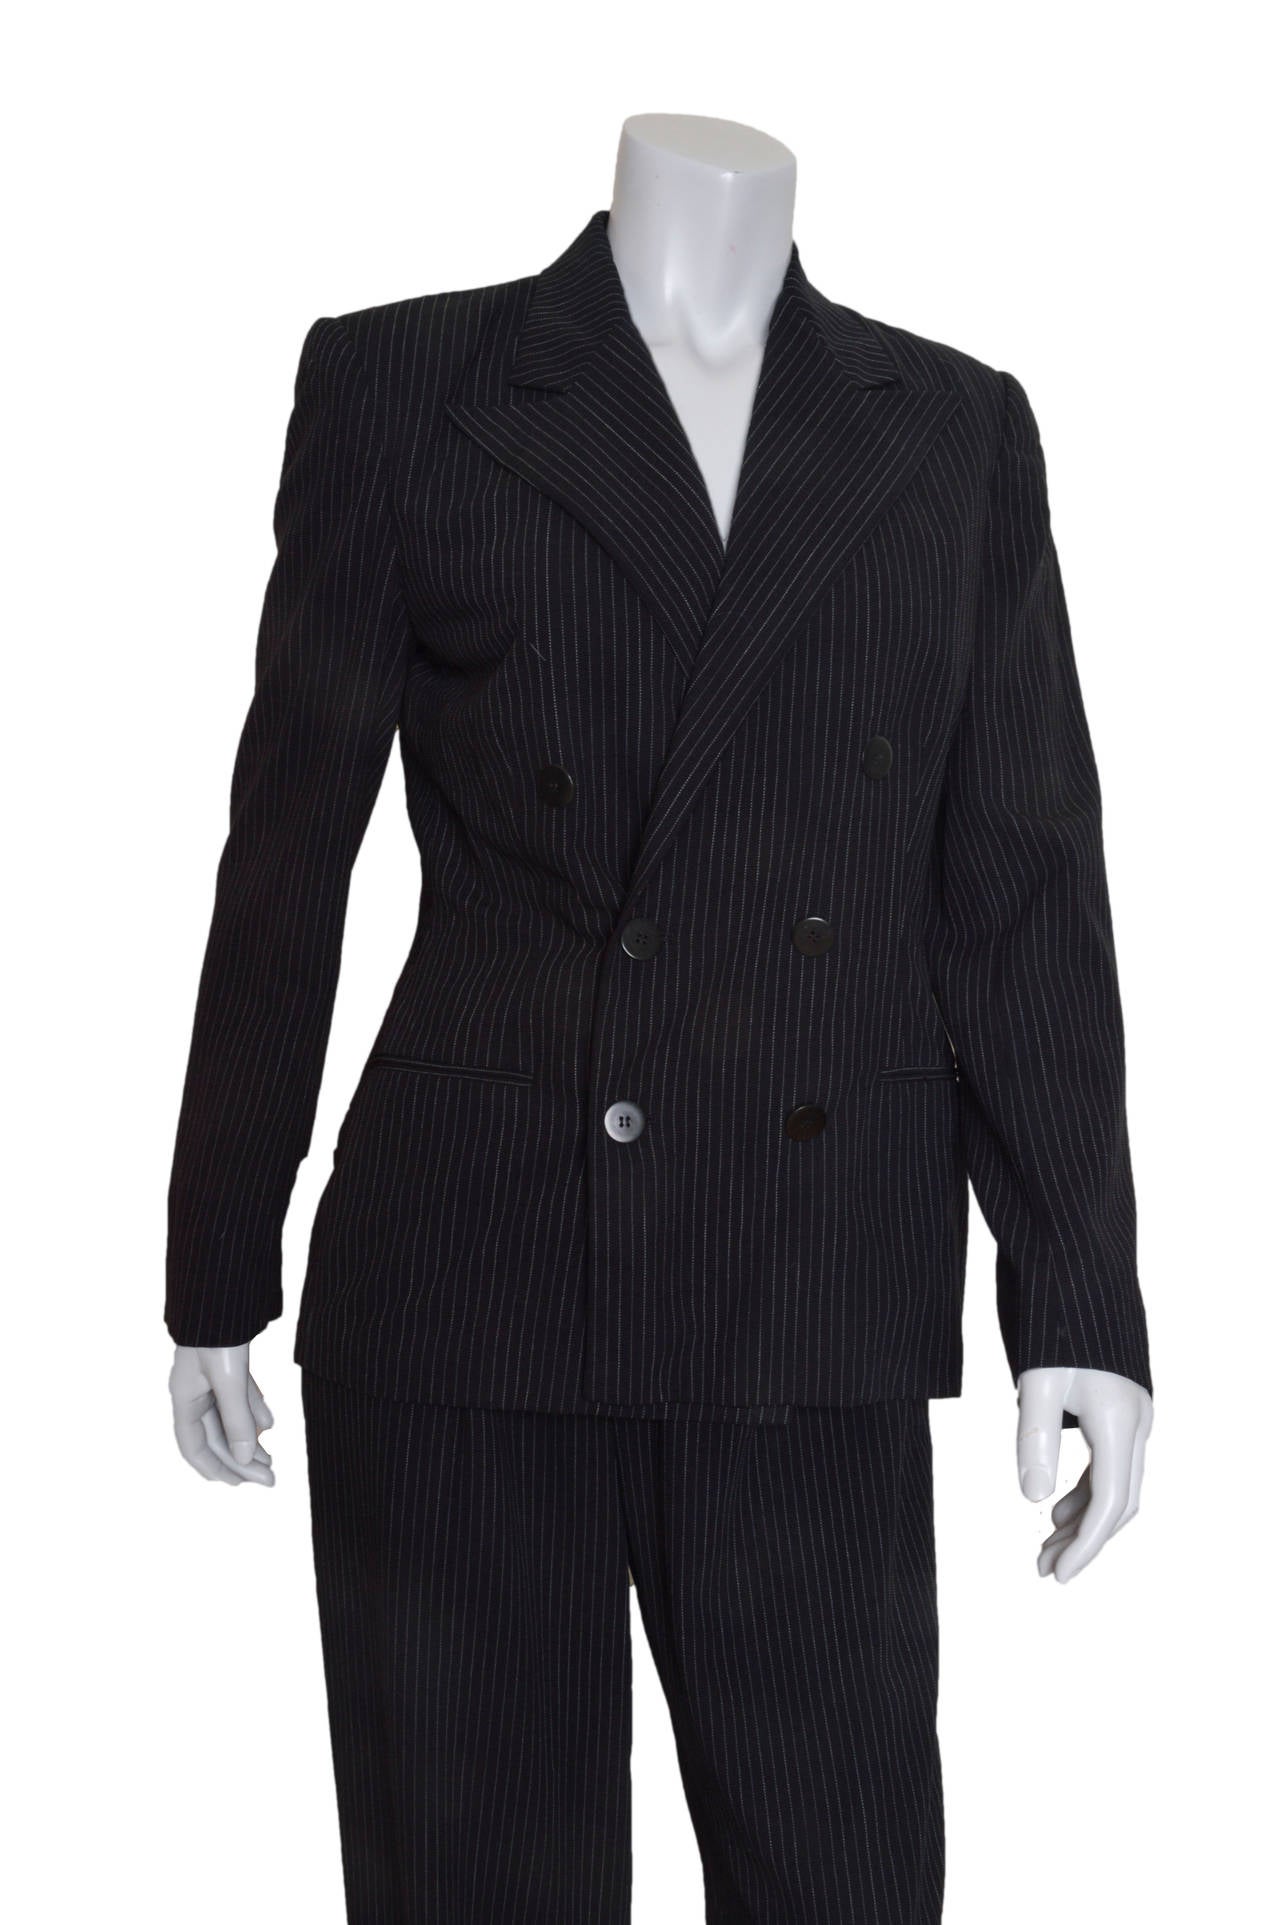 Ralph Lauren Collection double breasted pant suit.
Purple Label.
A feminine take on a very masculine shape.
Black with white pinstripes.
Slightly fitted jacket with padded shoulders for shape.
Front slit pockets.
Button detail on wrists.
Wide